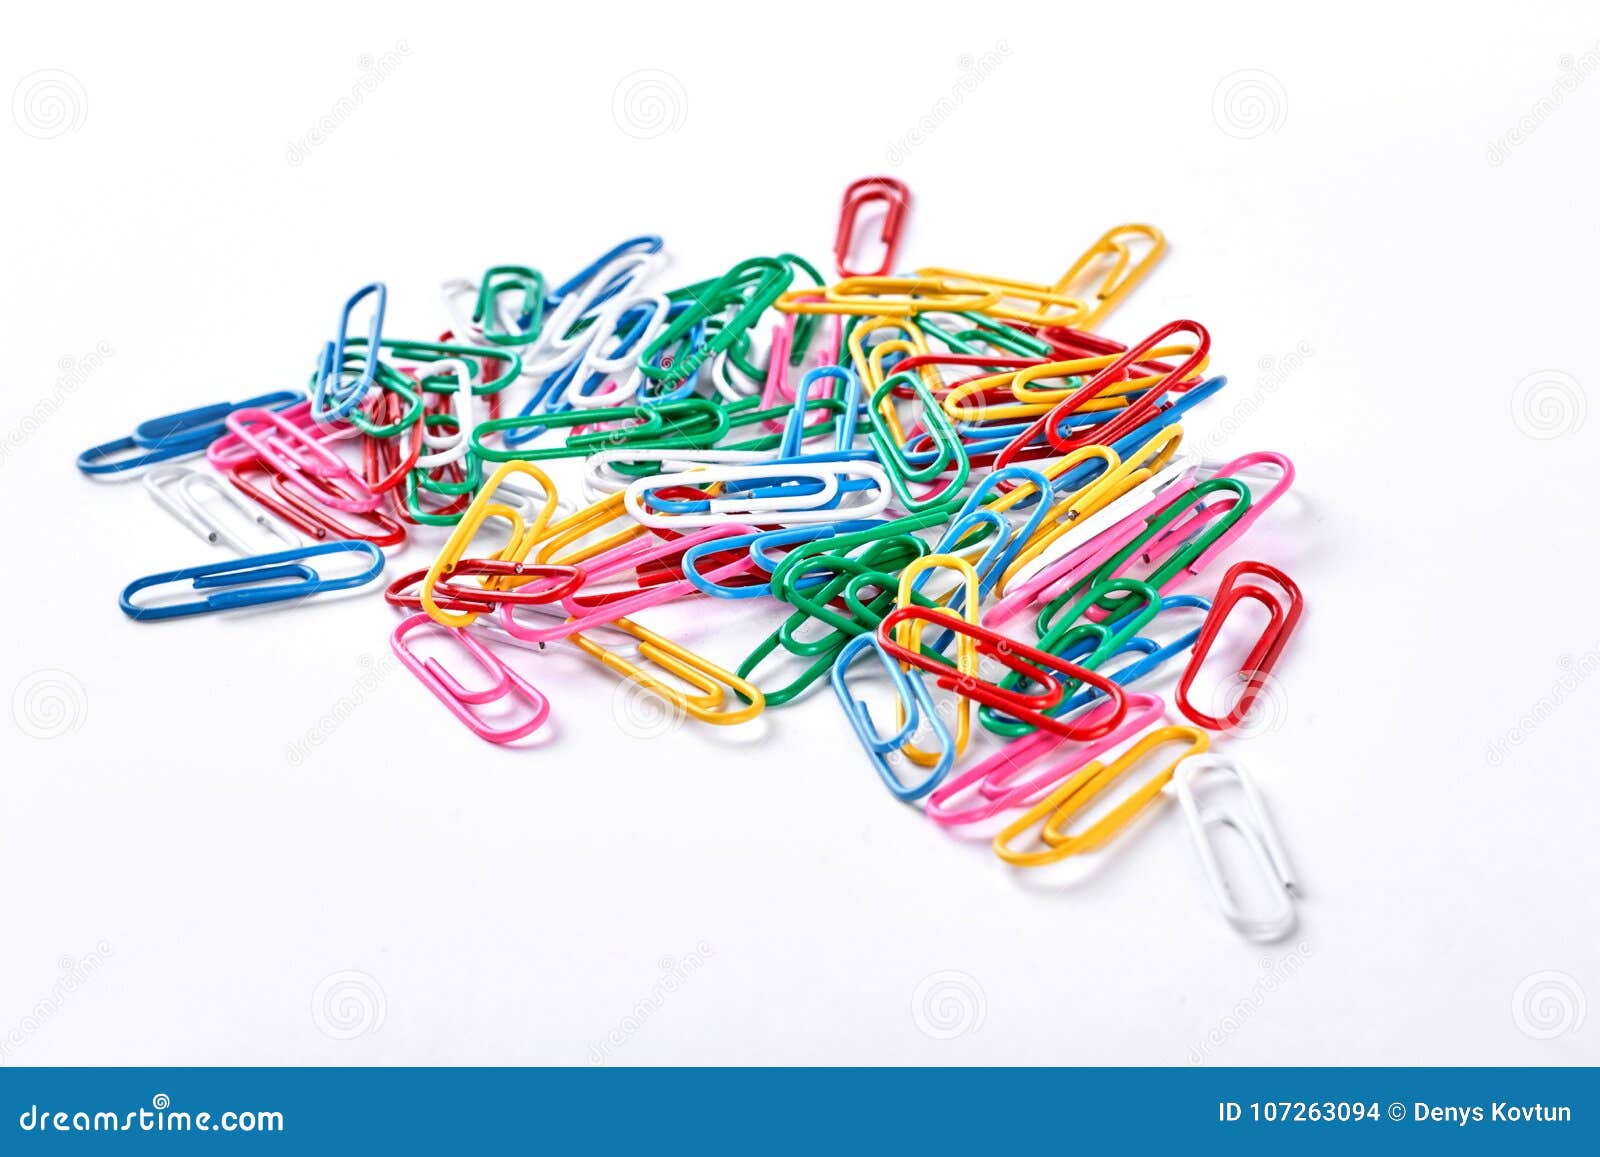 Heap Of Colorful Plastic Paper Clips. Stock Photo Image